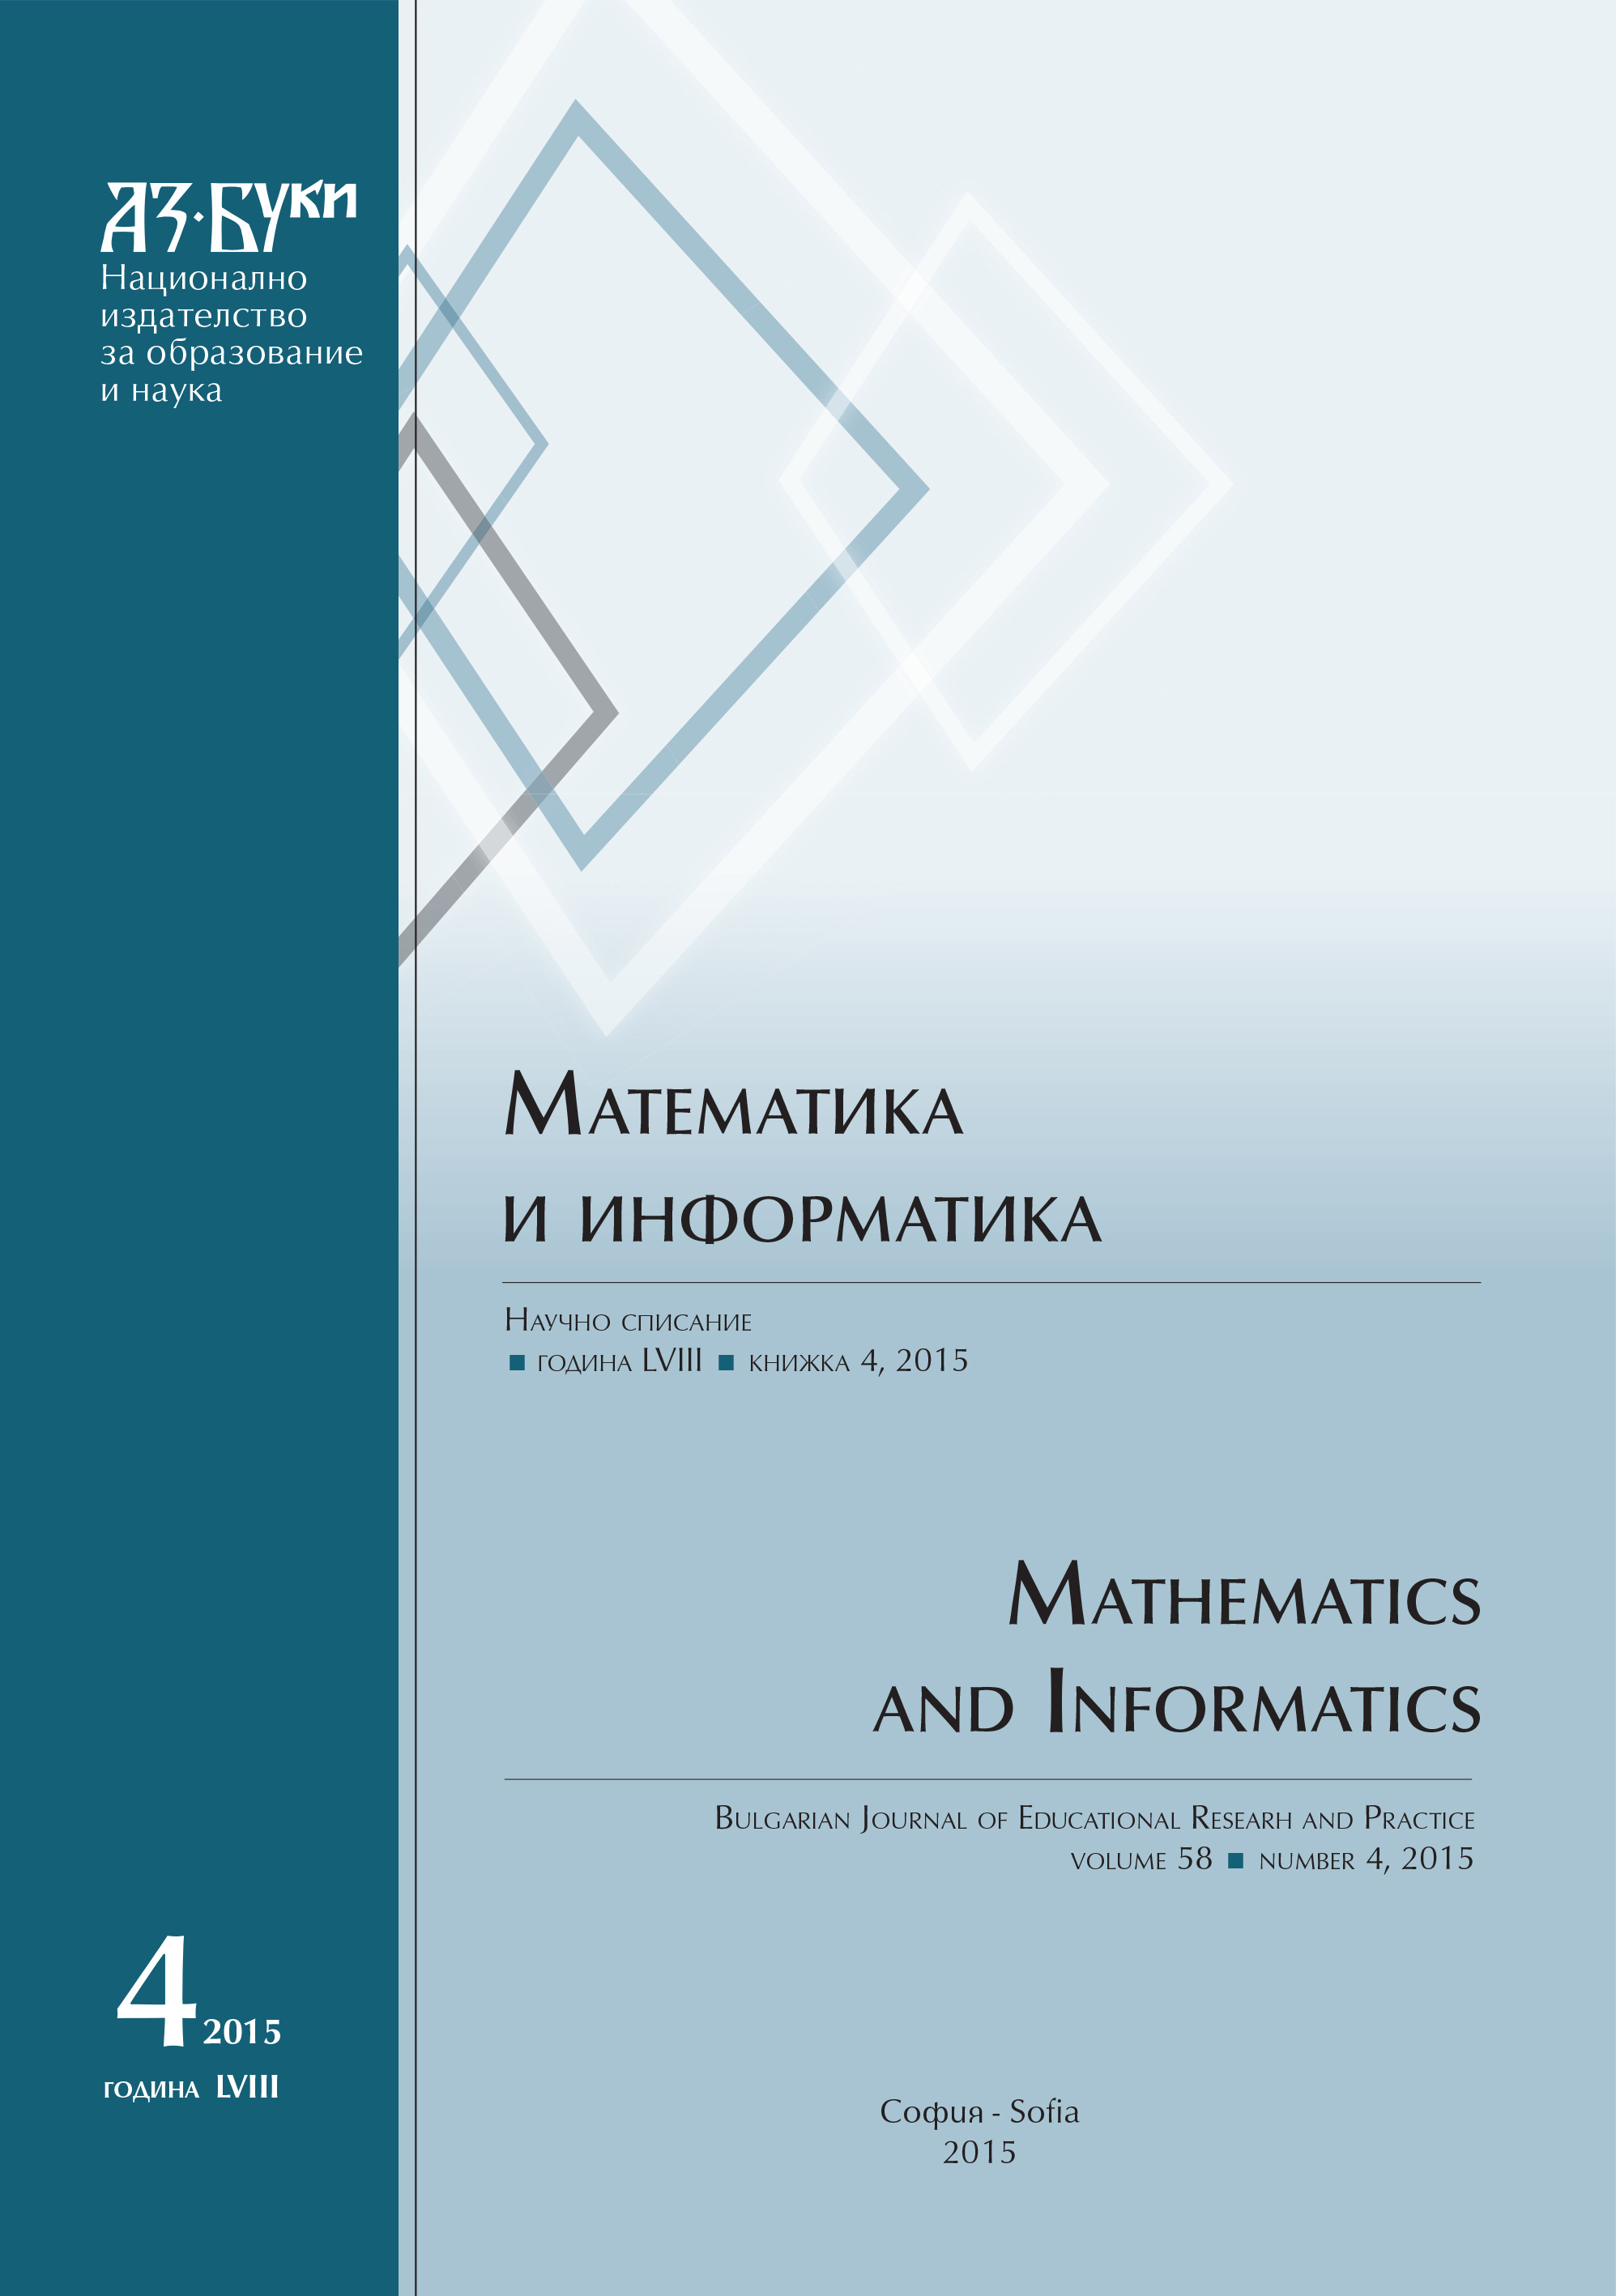 The Golden Section and the Fibonacci Numbers – Synergetic Relationship Between Mathematics, Informatics and Music Cover Image